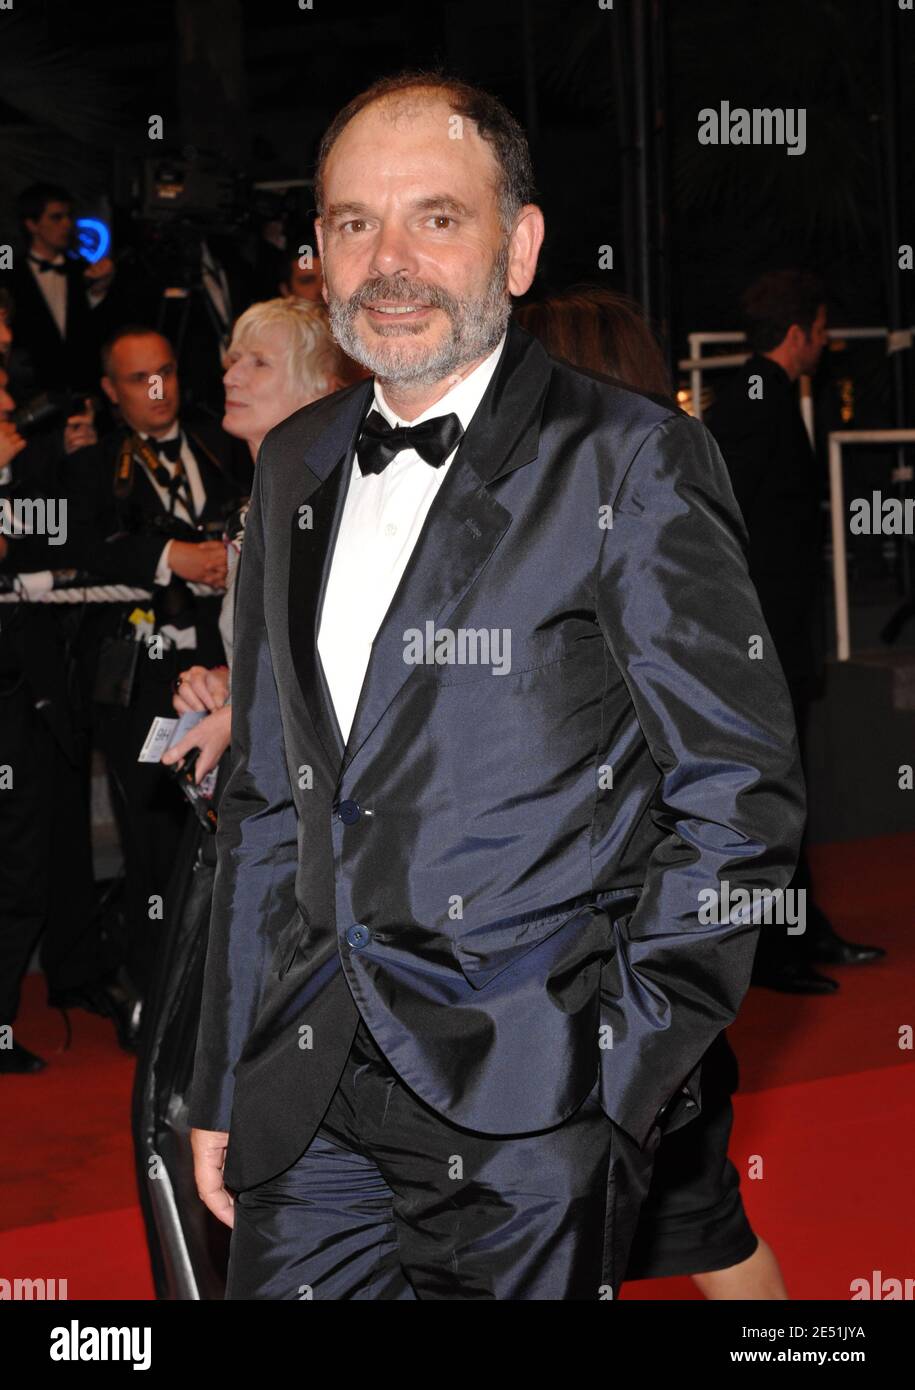 Jean-Pierre Darroussin arriving at the Palais des Festivals in Cannes, Southern France, May 19, 2008, for the screening of James Gray's Two Lovers presented in competition at the 61st Cannes Film Festival. Photo by Hahn-Nebinger-Orban/ABACAPRESS.COM Stock Photo